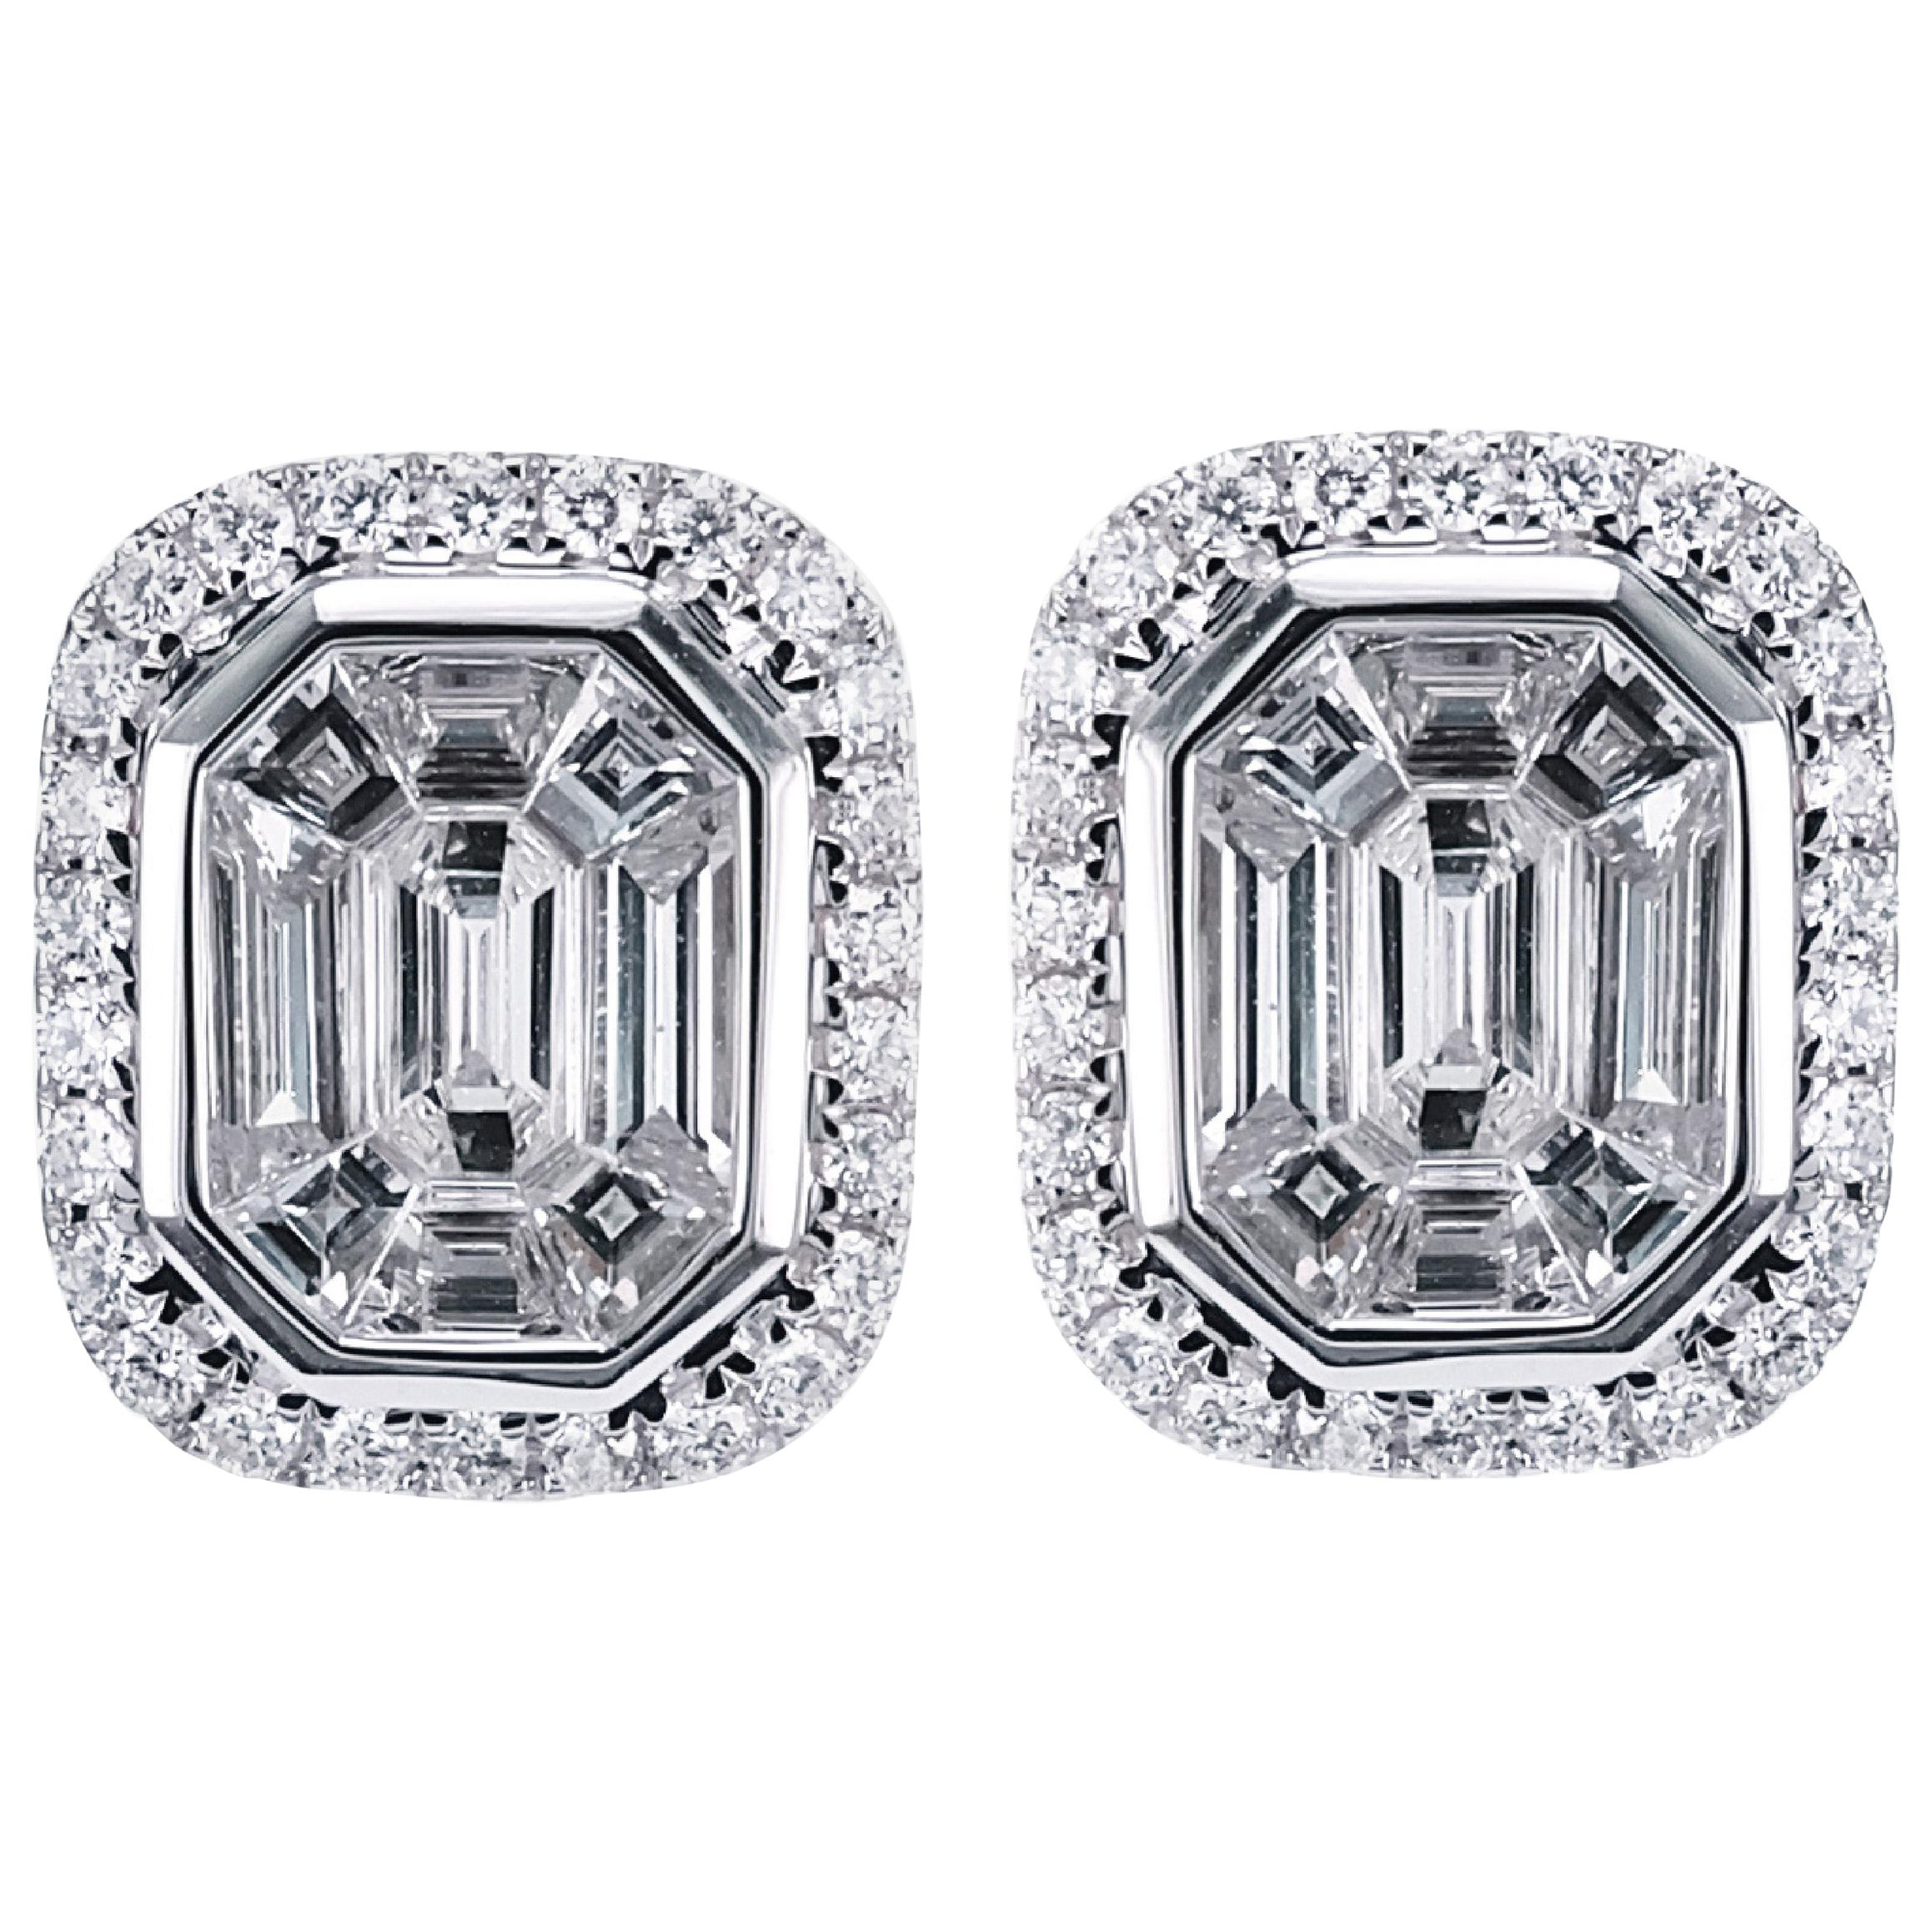 Emerald Cut Invisible Setting 2 Carat Outlook Each Head Turner Earring